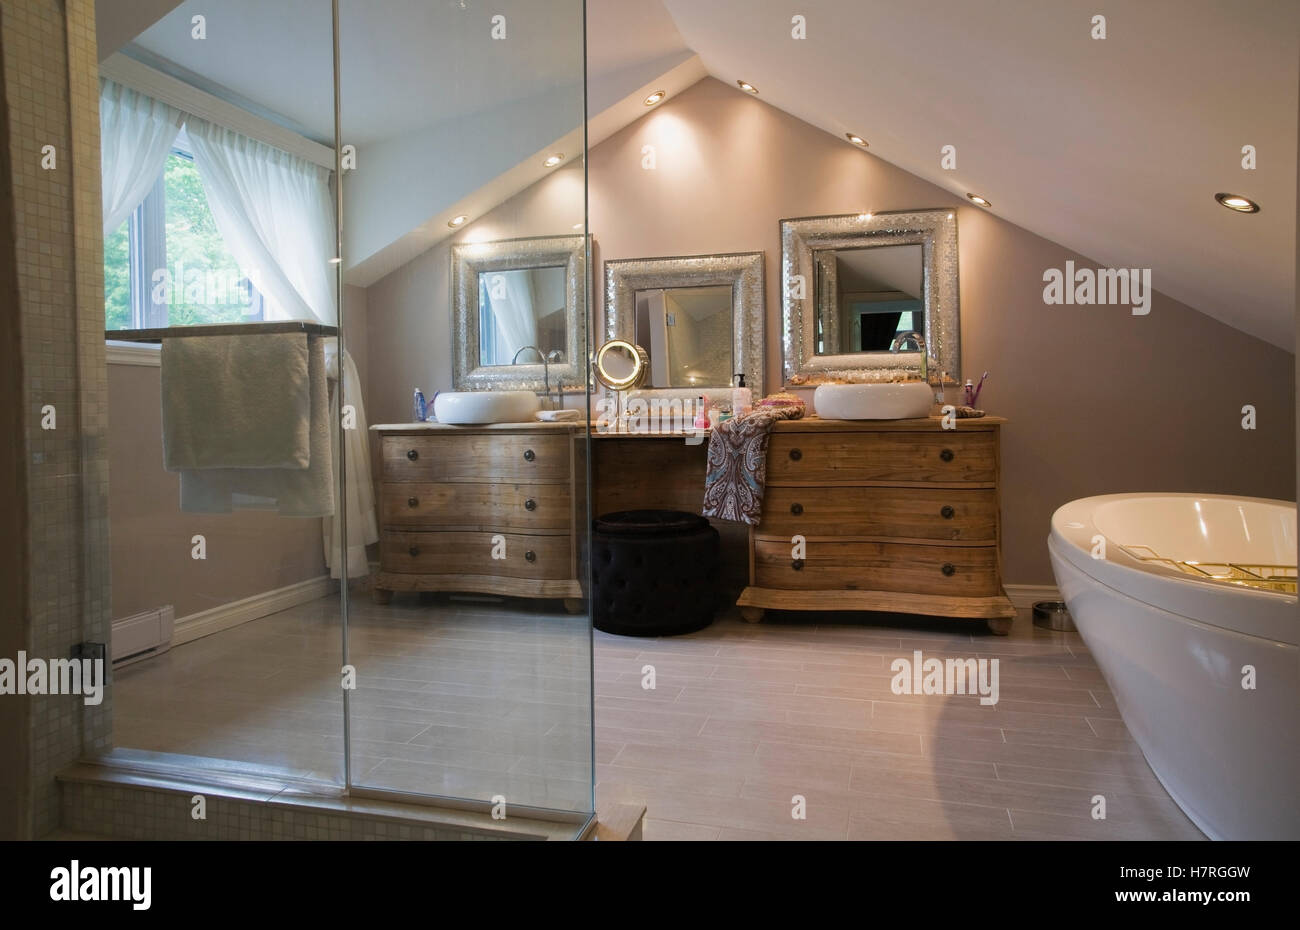 Master Bathroom With Wooden Cabinets And Silver Framed Mirrors